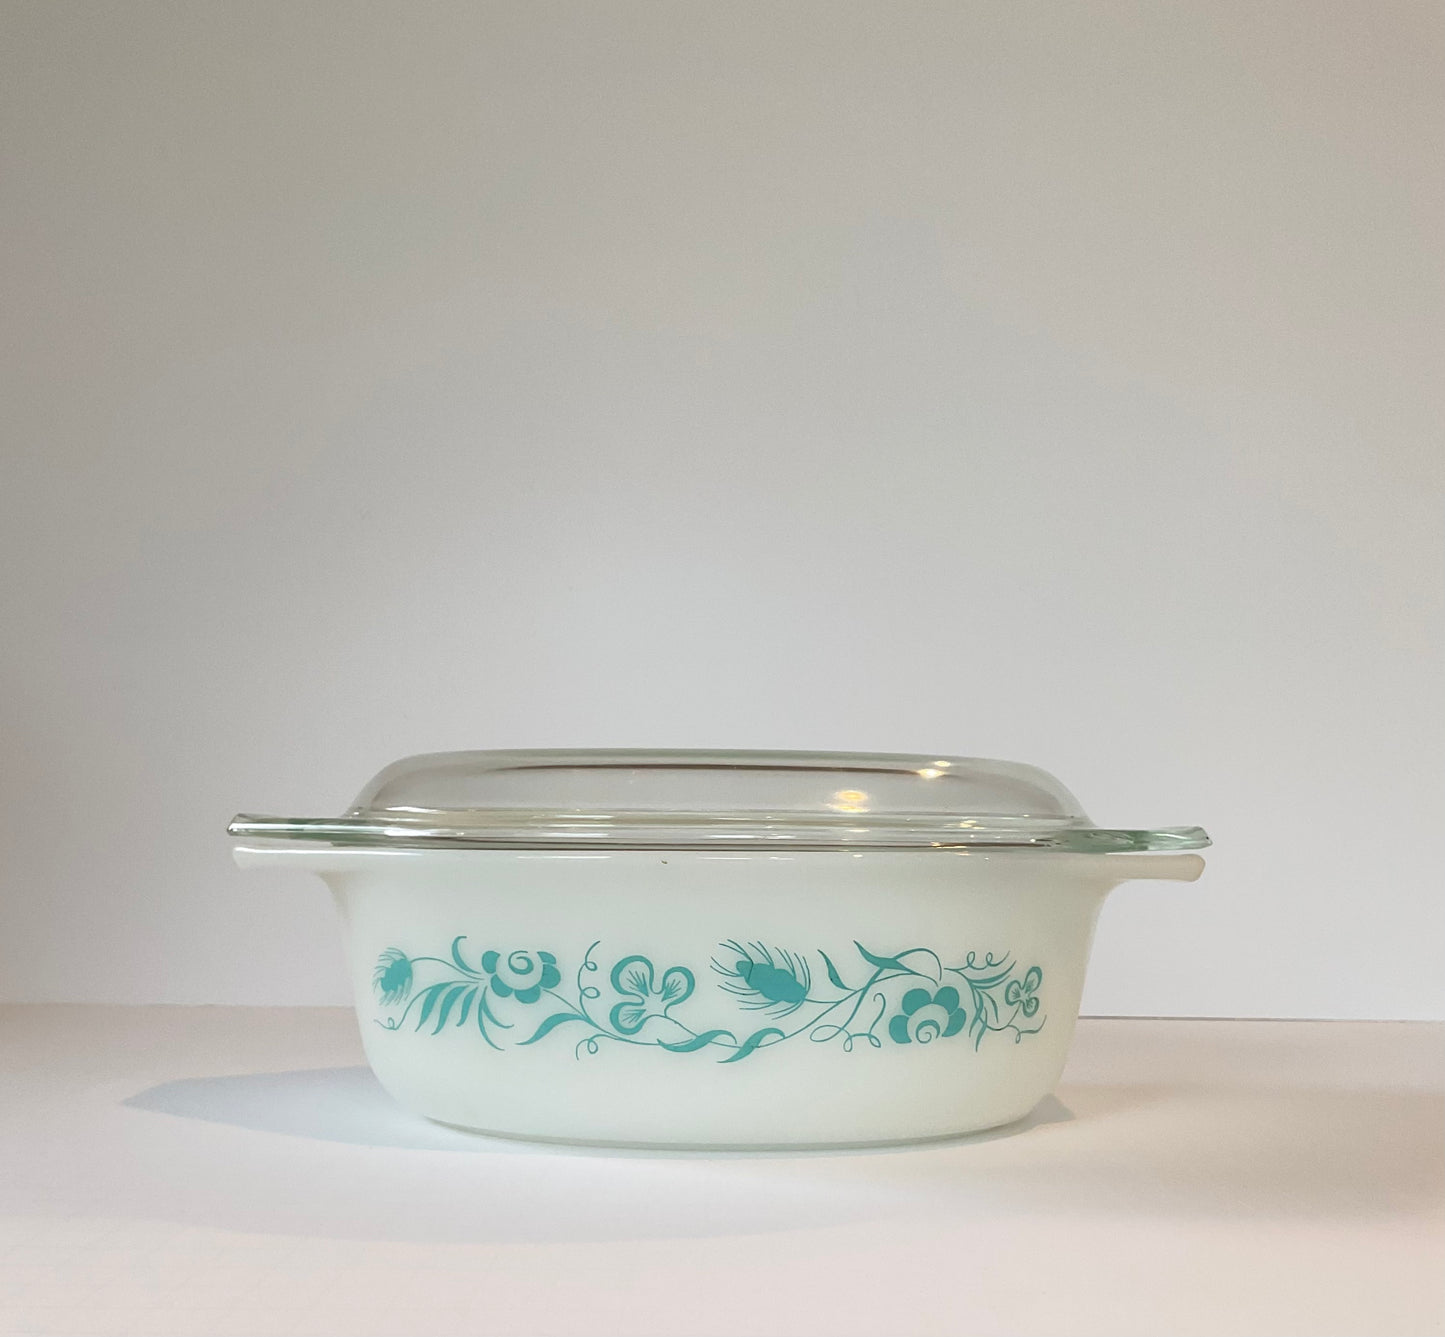 RARE Vintage Pyrex 043 Covered Casserole Dish, Rare Meadow Pattern